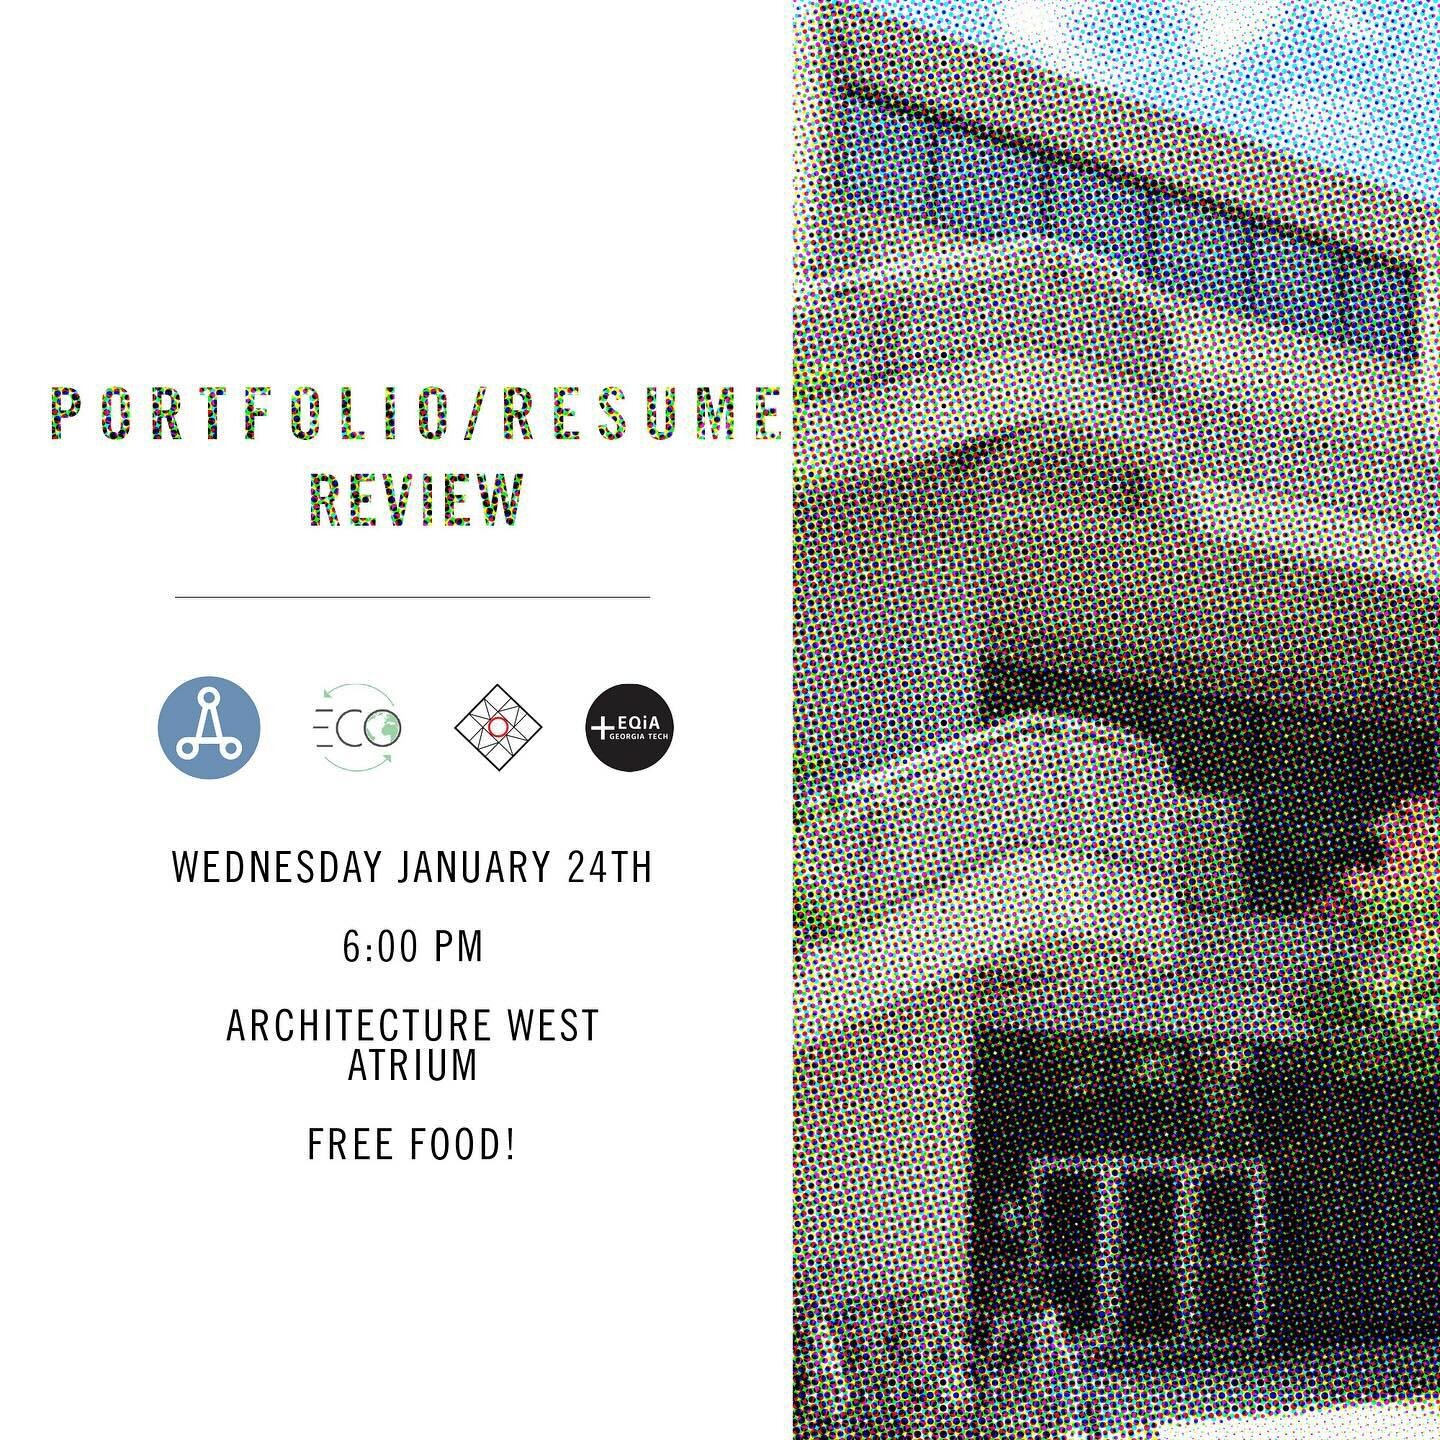 Join us at our Annual Portfolio and Resume Review and get a chance to gain essential feedback ahead of career fair. We will have a great group of faculty and professionals to give you advice! 
RSVP at the link in our bio